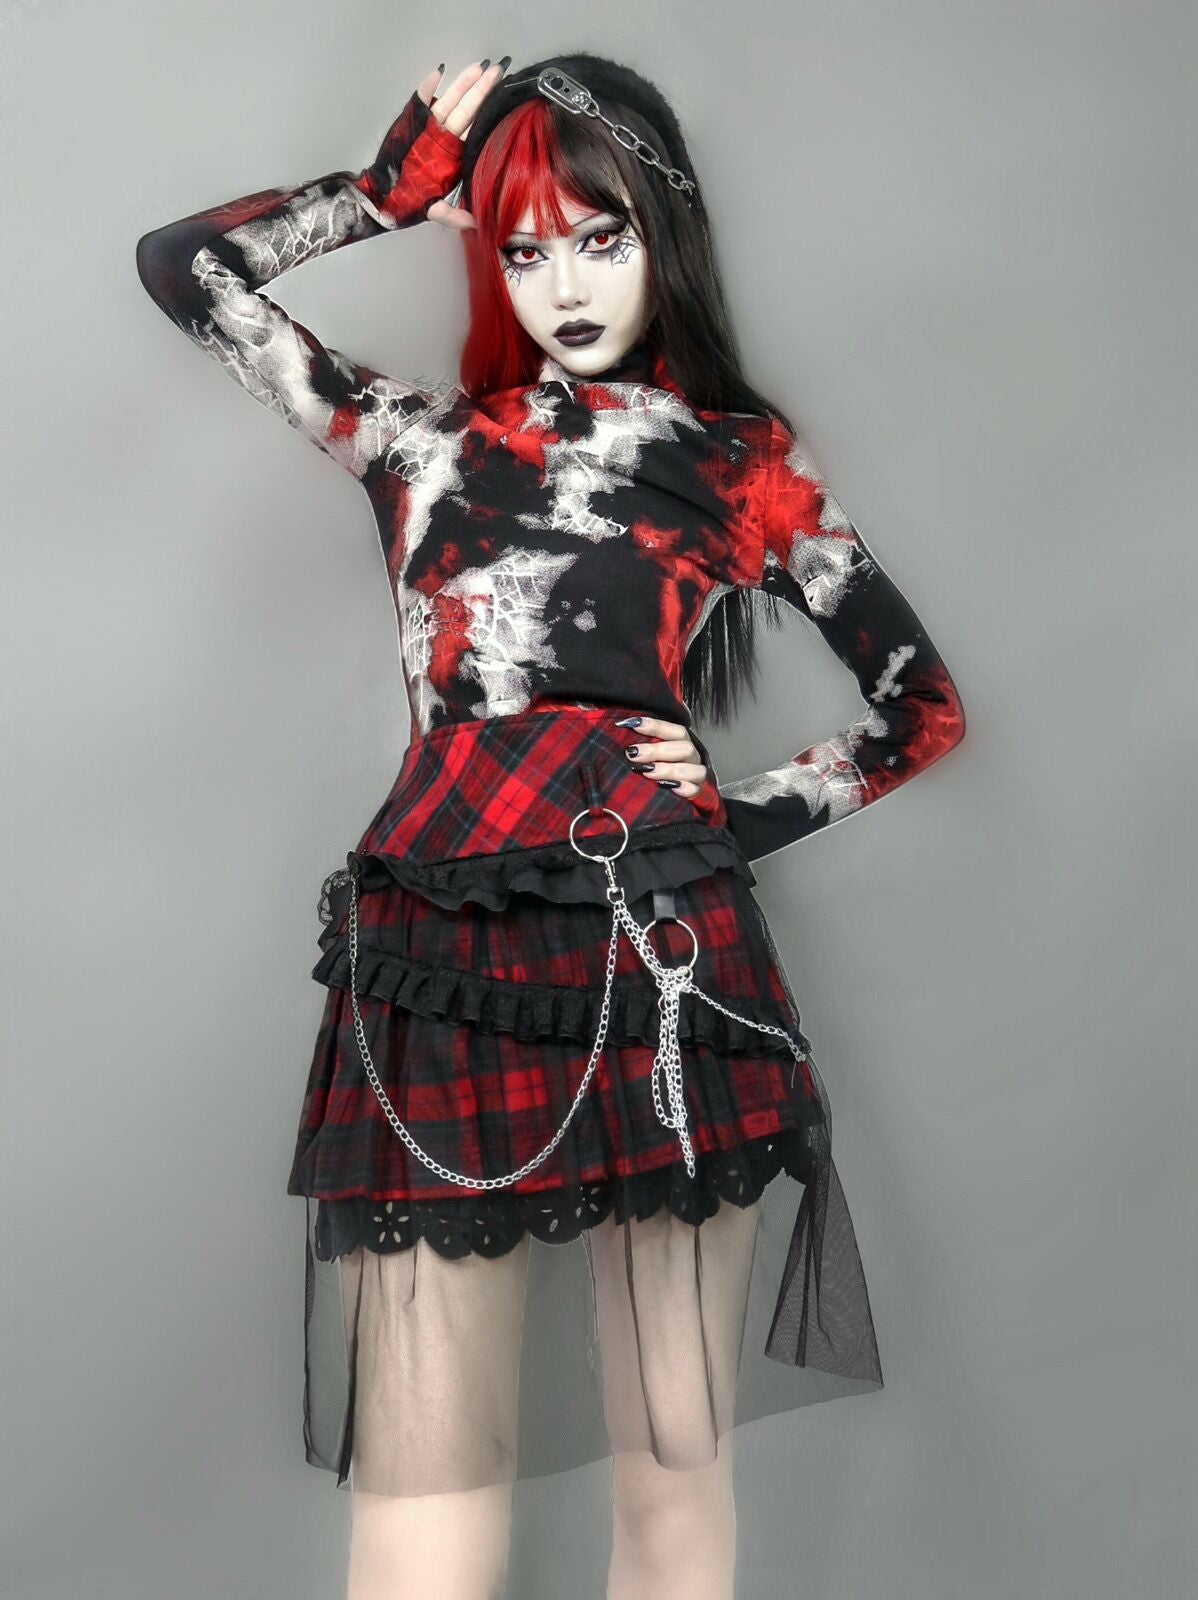 A Maramalive™ woman with black hair and a red and black plaid skirt. She also wore the Gothic Cobweb Long Sleeved Shirt - Punk Spider pattern Top.